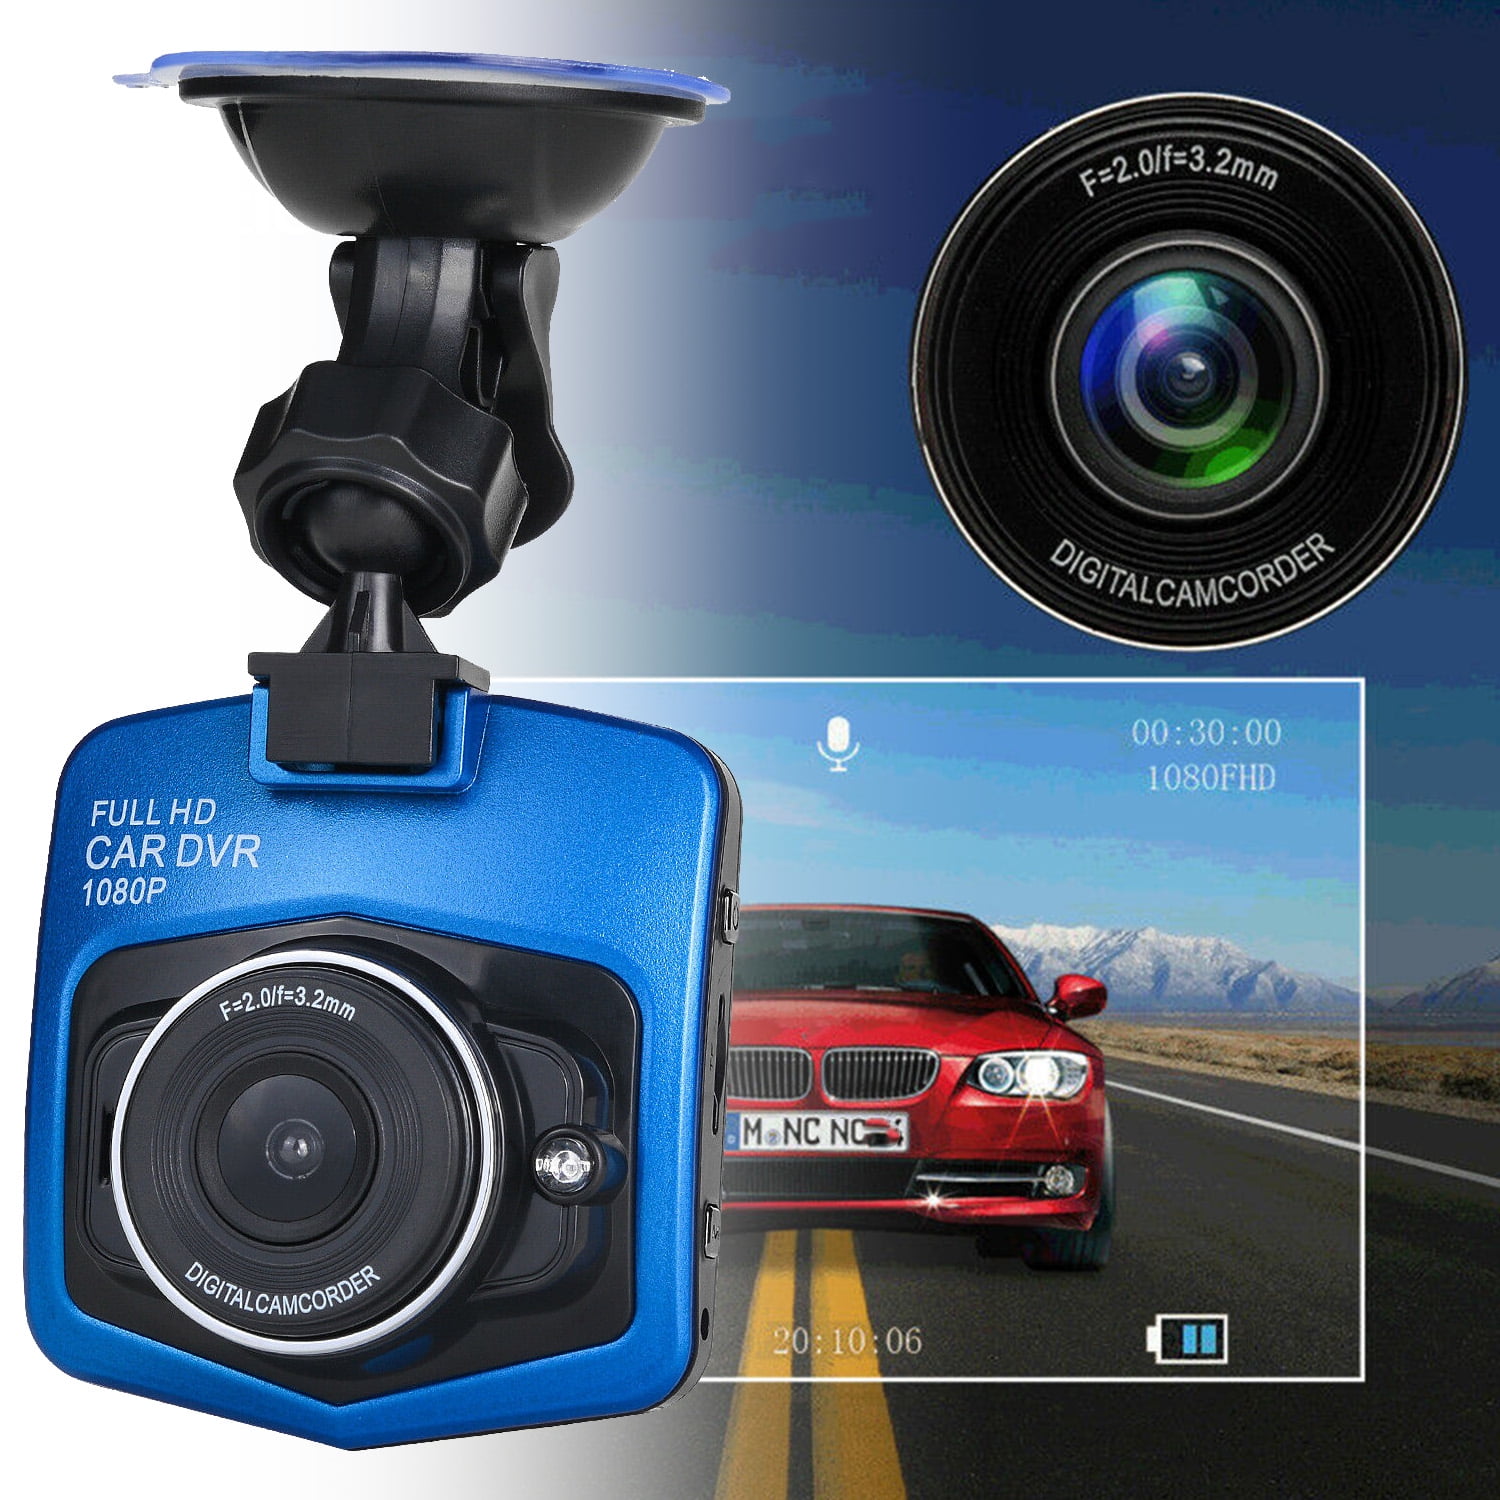 CAMECHO Dual Dash Cam 1080P Front and Inside Dash Camera for Cars 2 Channel  Dashcam, 3.16 IPS Screen, IR Night Vision, Loop Recording, 24hr Parking